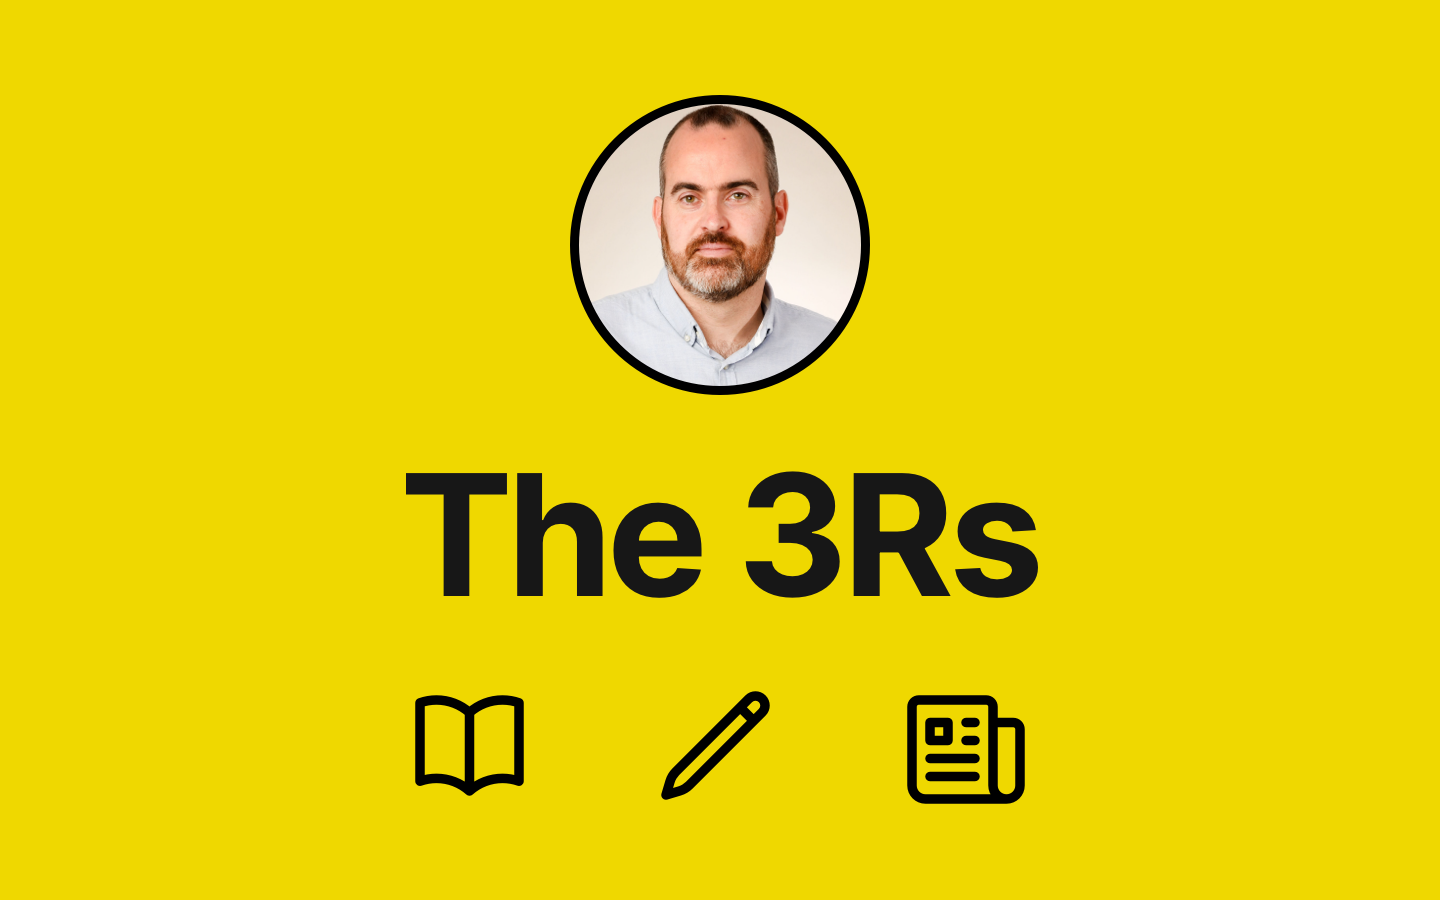 The 3Rs: What I'm reading, (w)riting, & research I'm interested in - Issue #7 feature image